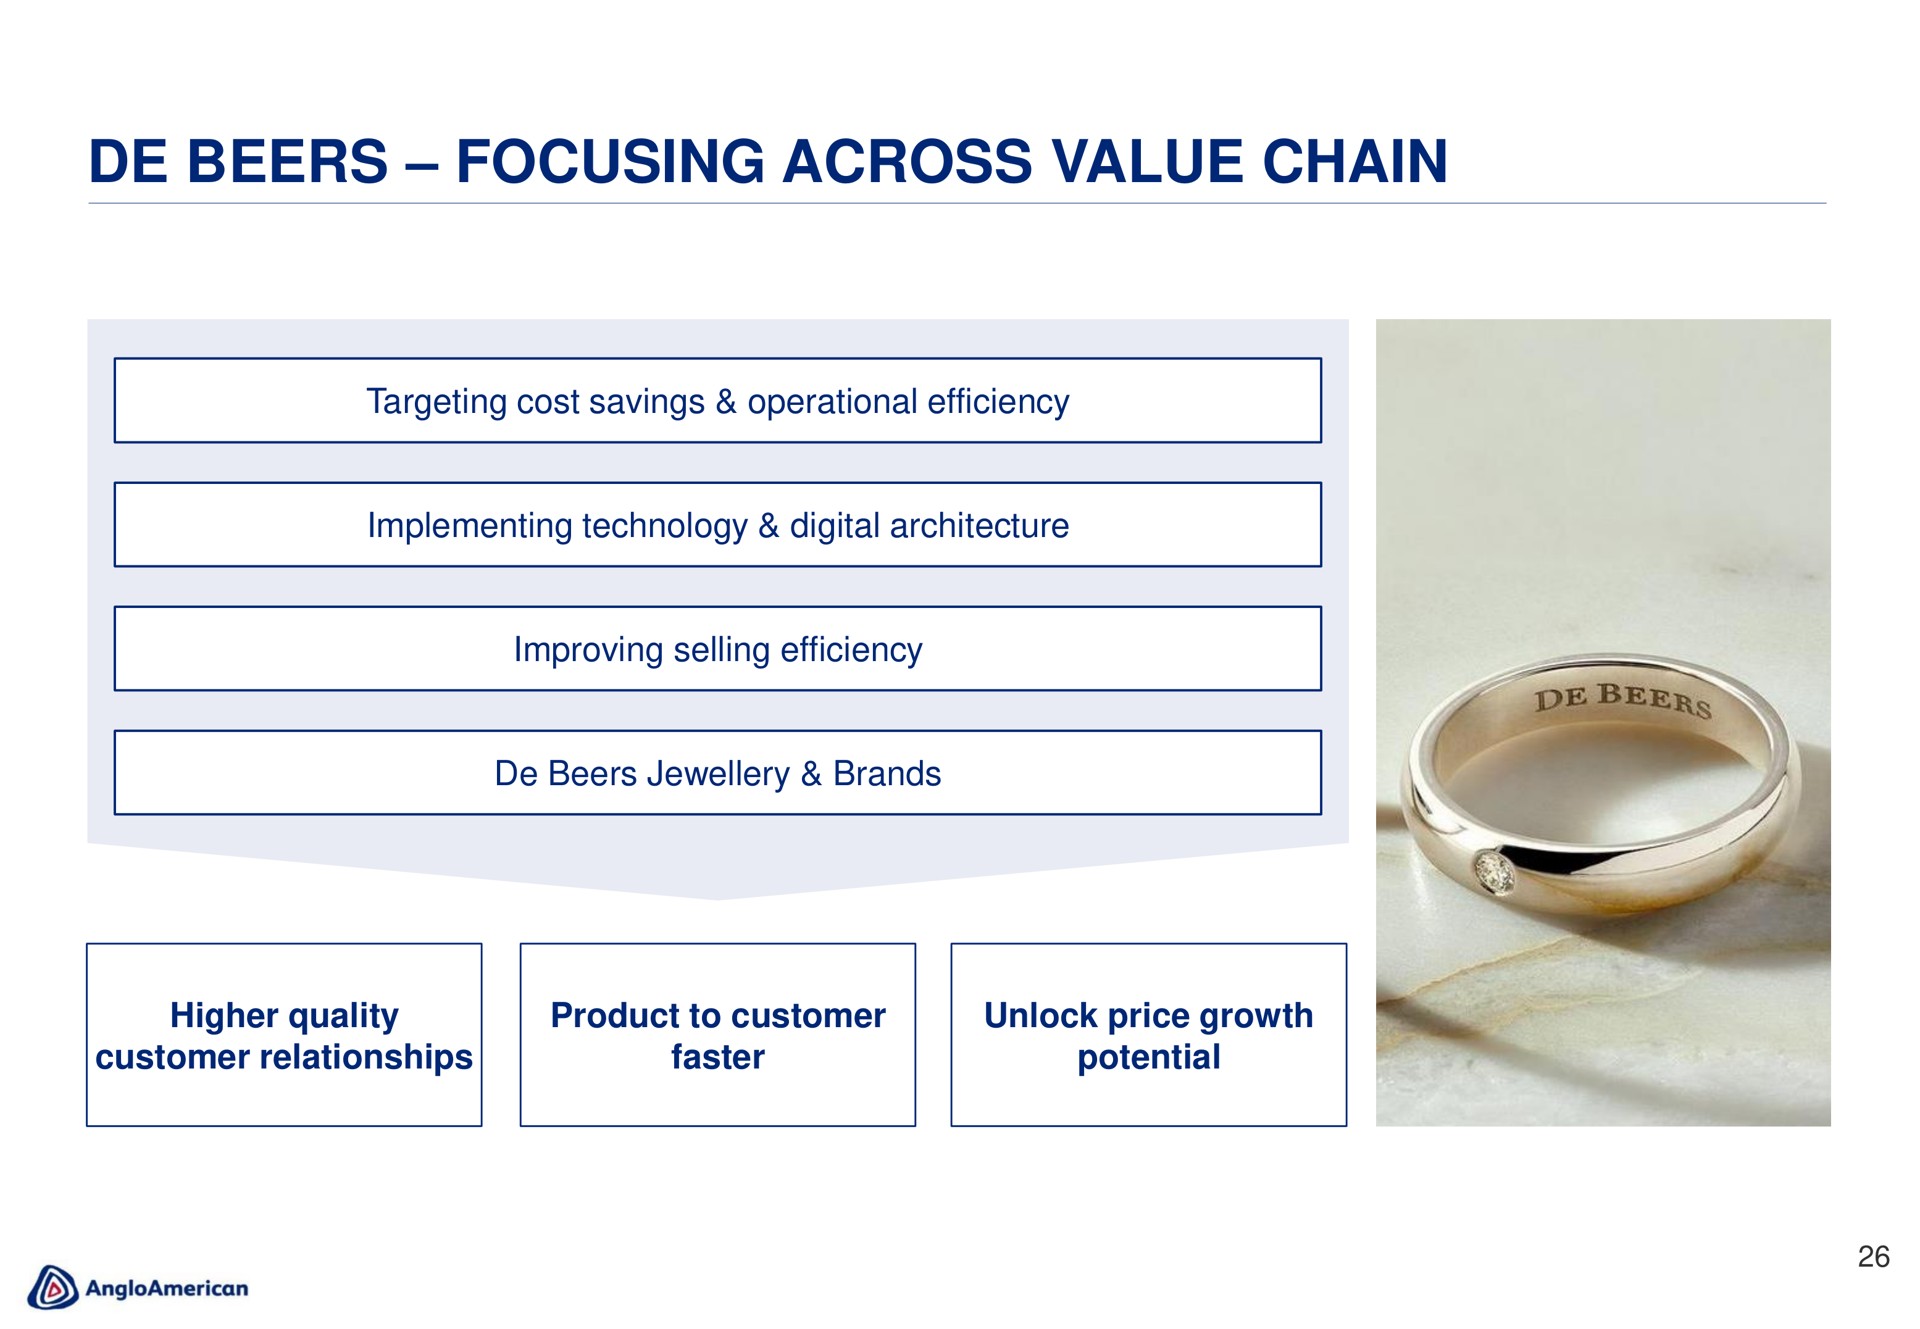 beers focusing across value chain | AngloAmerican